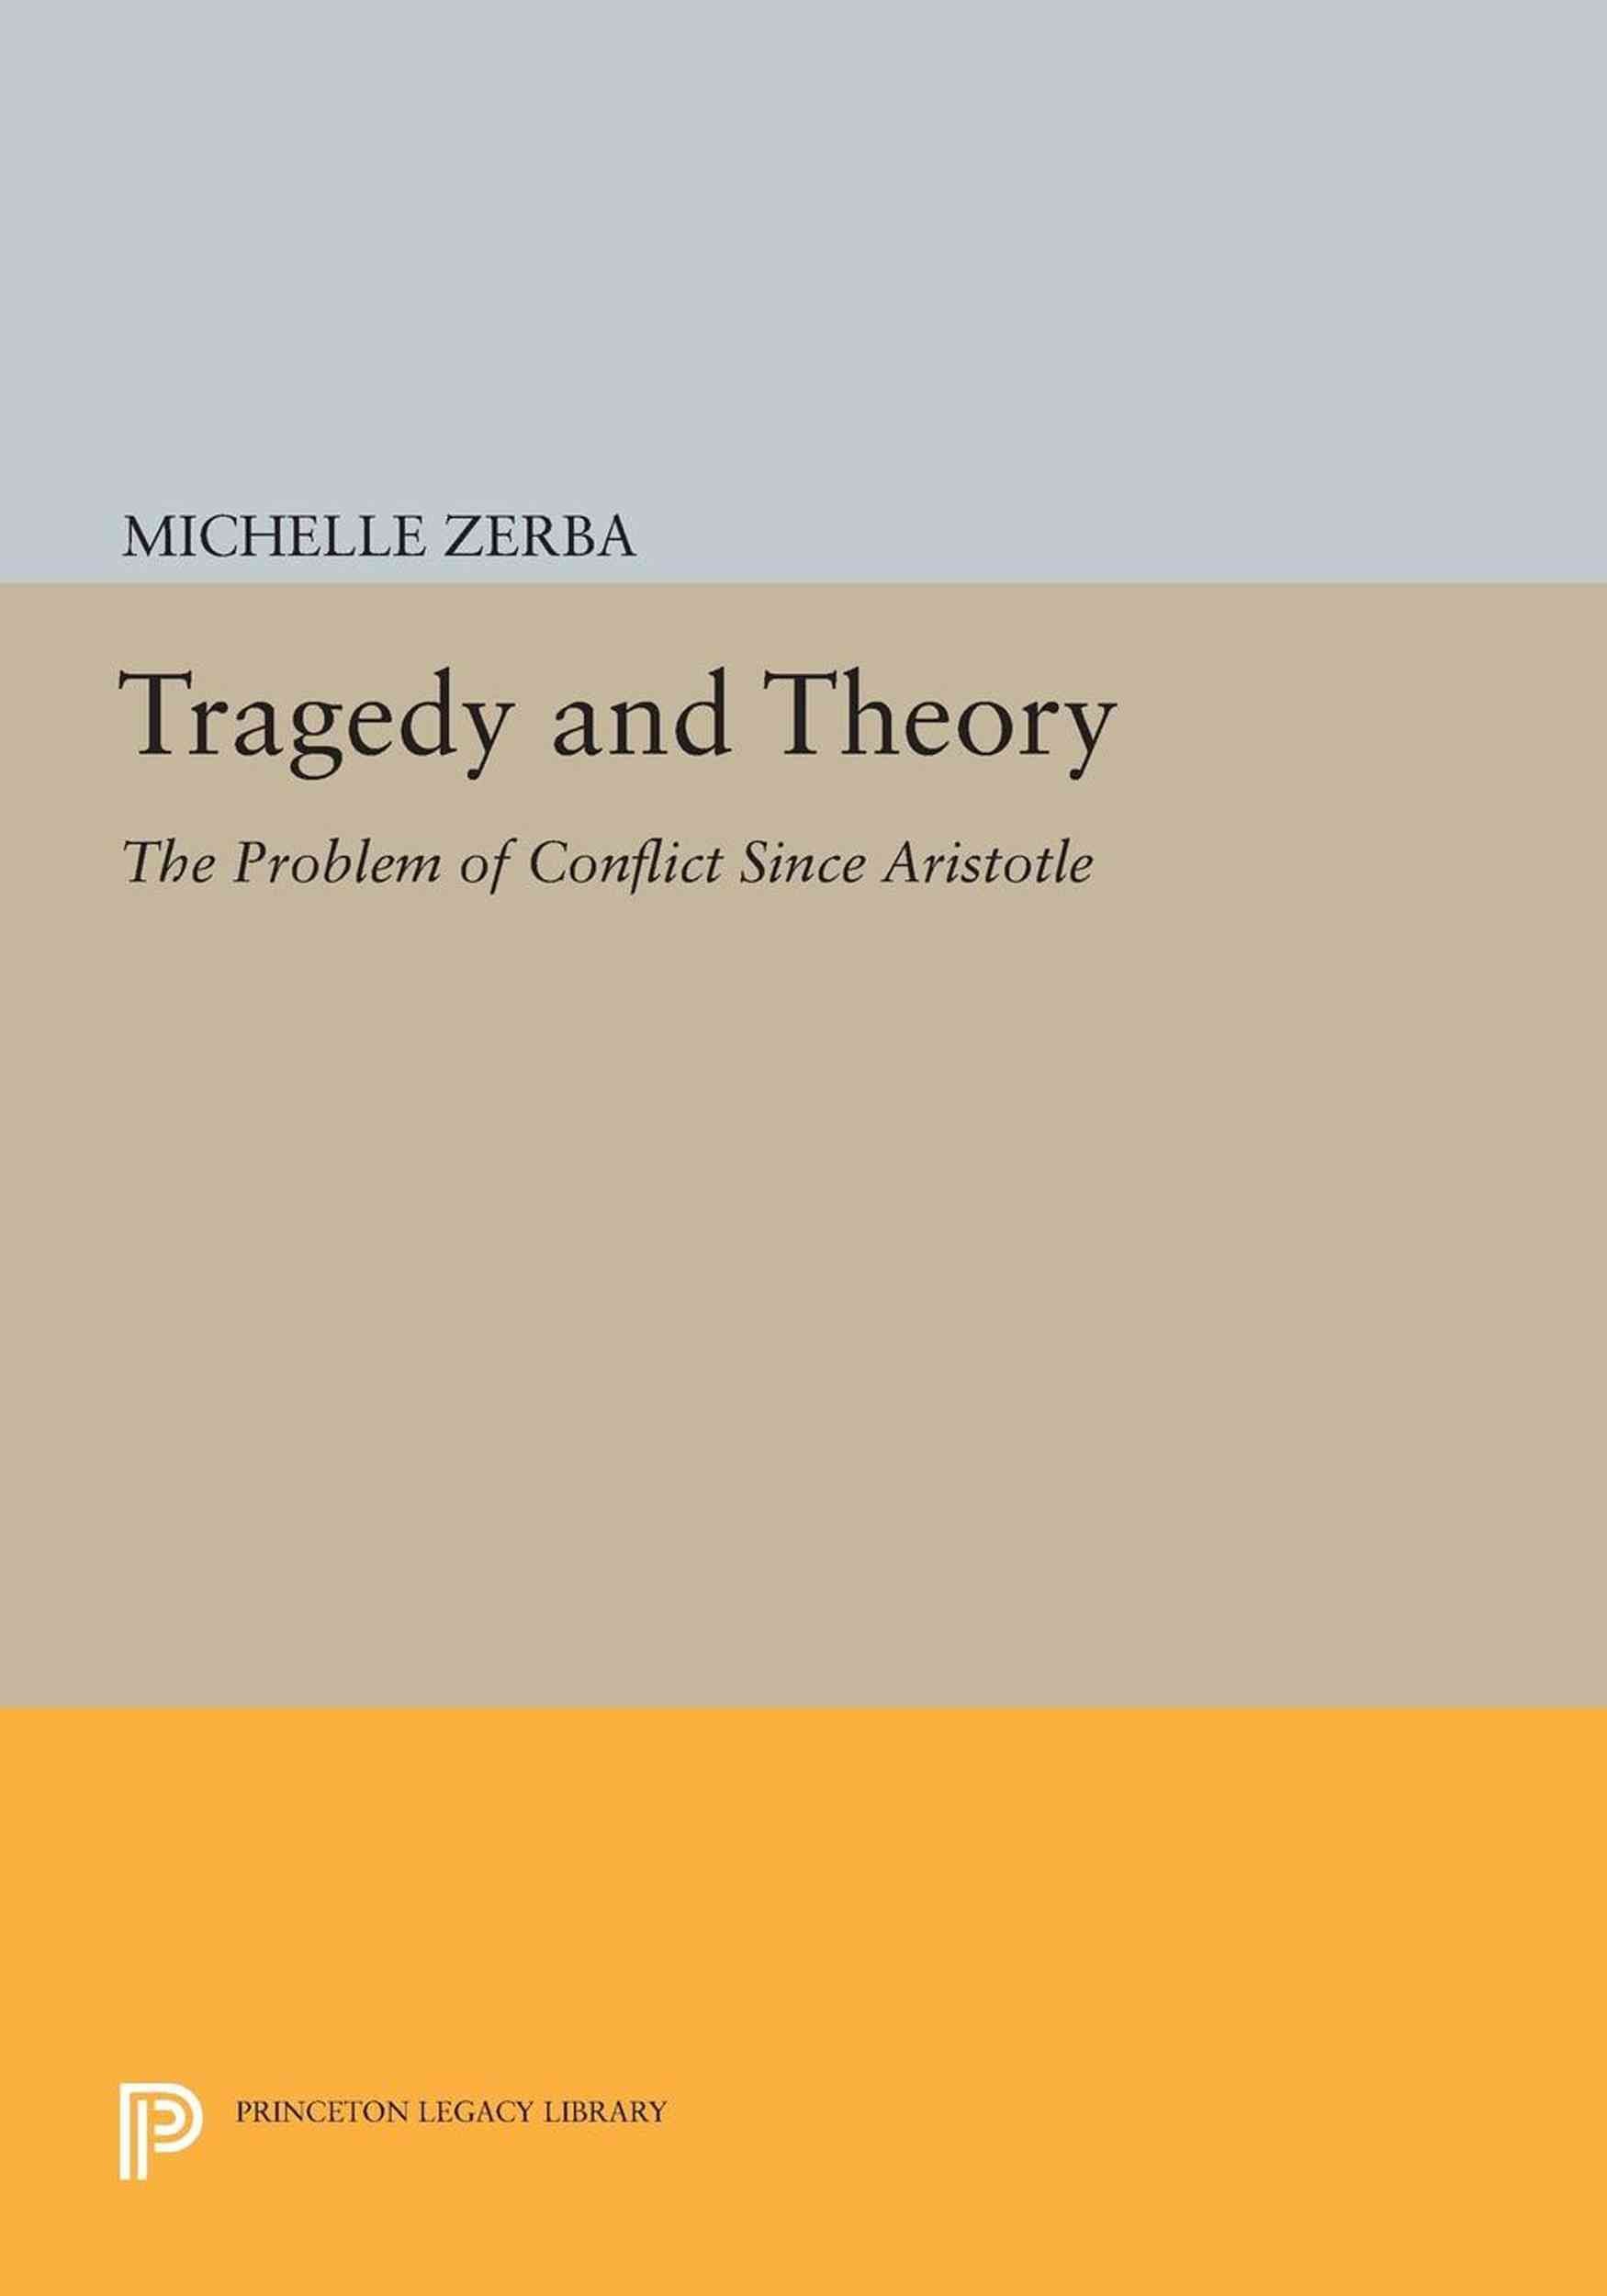 Zerba　Buy　Free　Theory　Tragedy　by　With　and　Michelle　Delivery